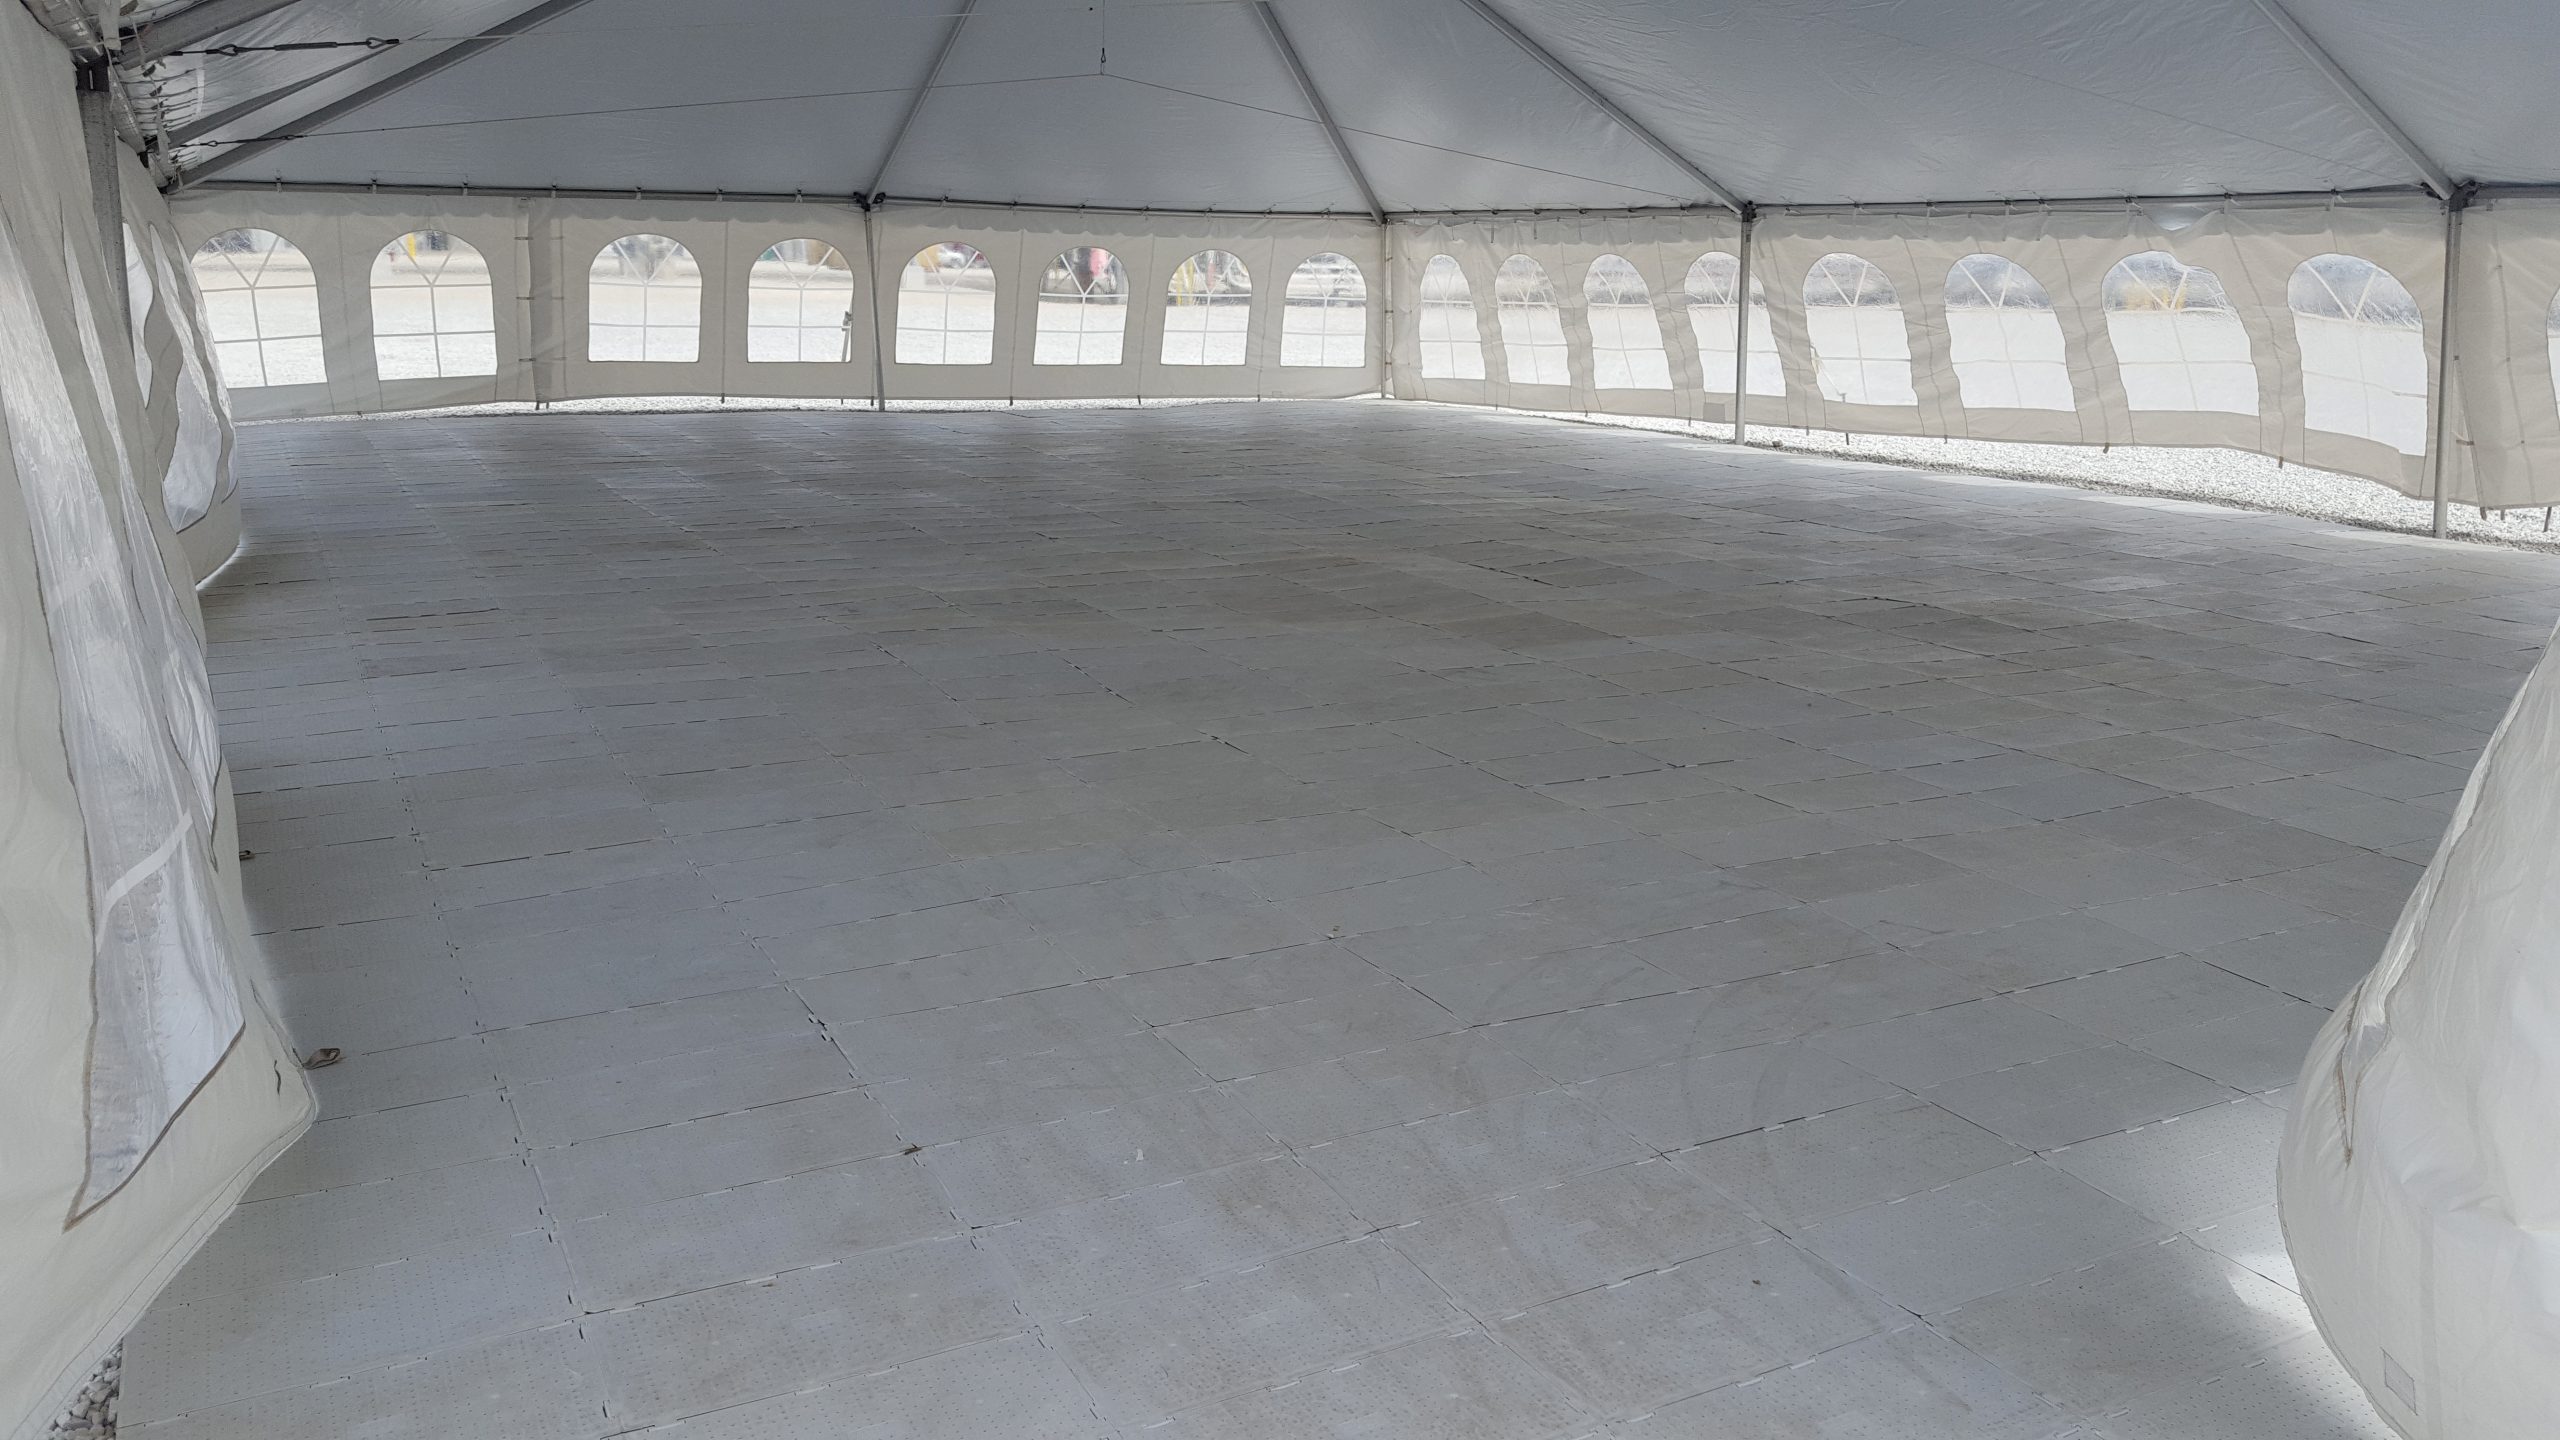 View under tent with 2,400 sq ft of sub floor